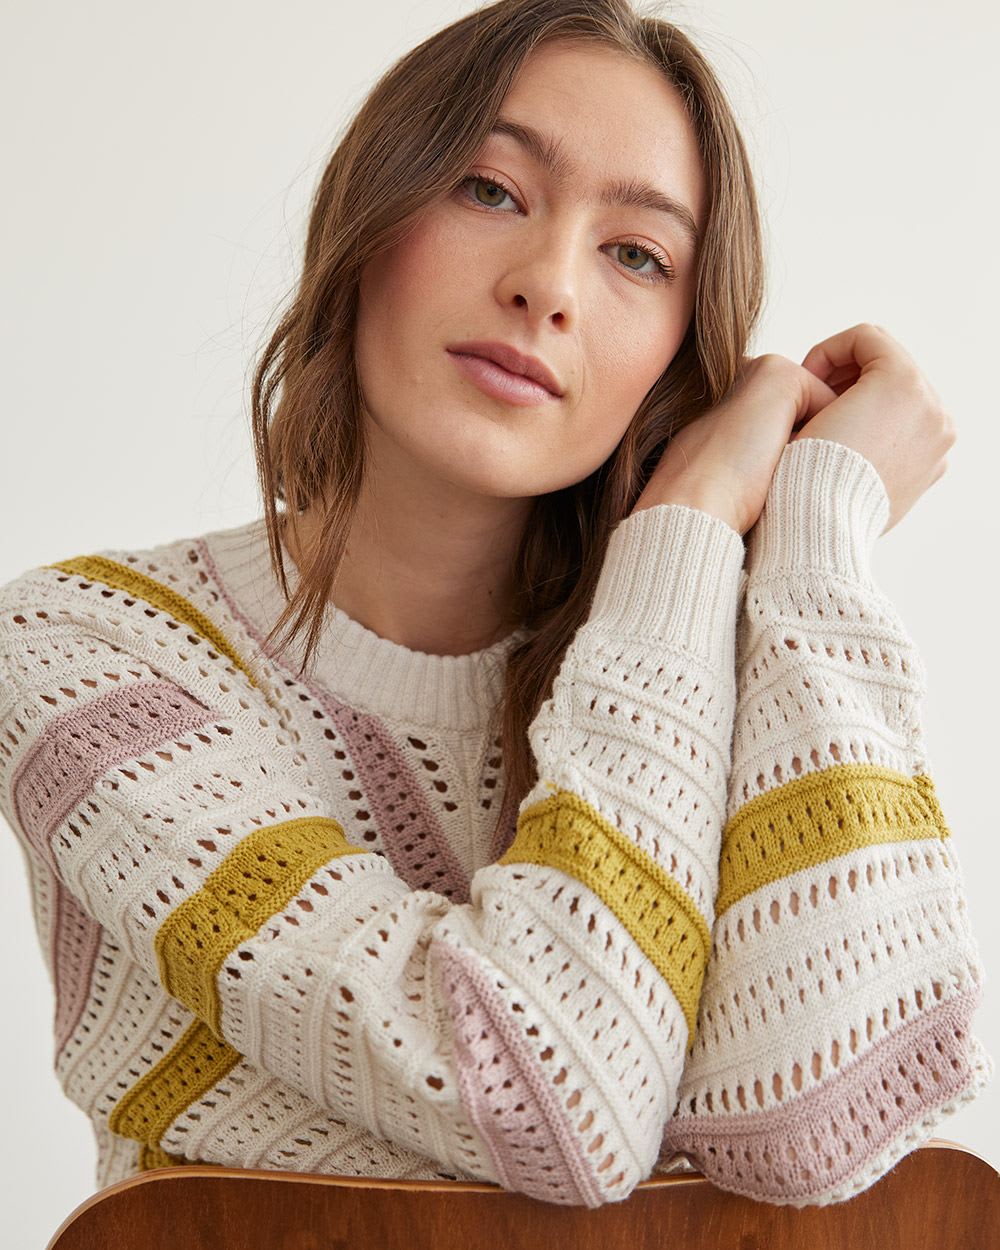 Long-Sleeve Crew-Neck Sweater with Open Stitches